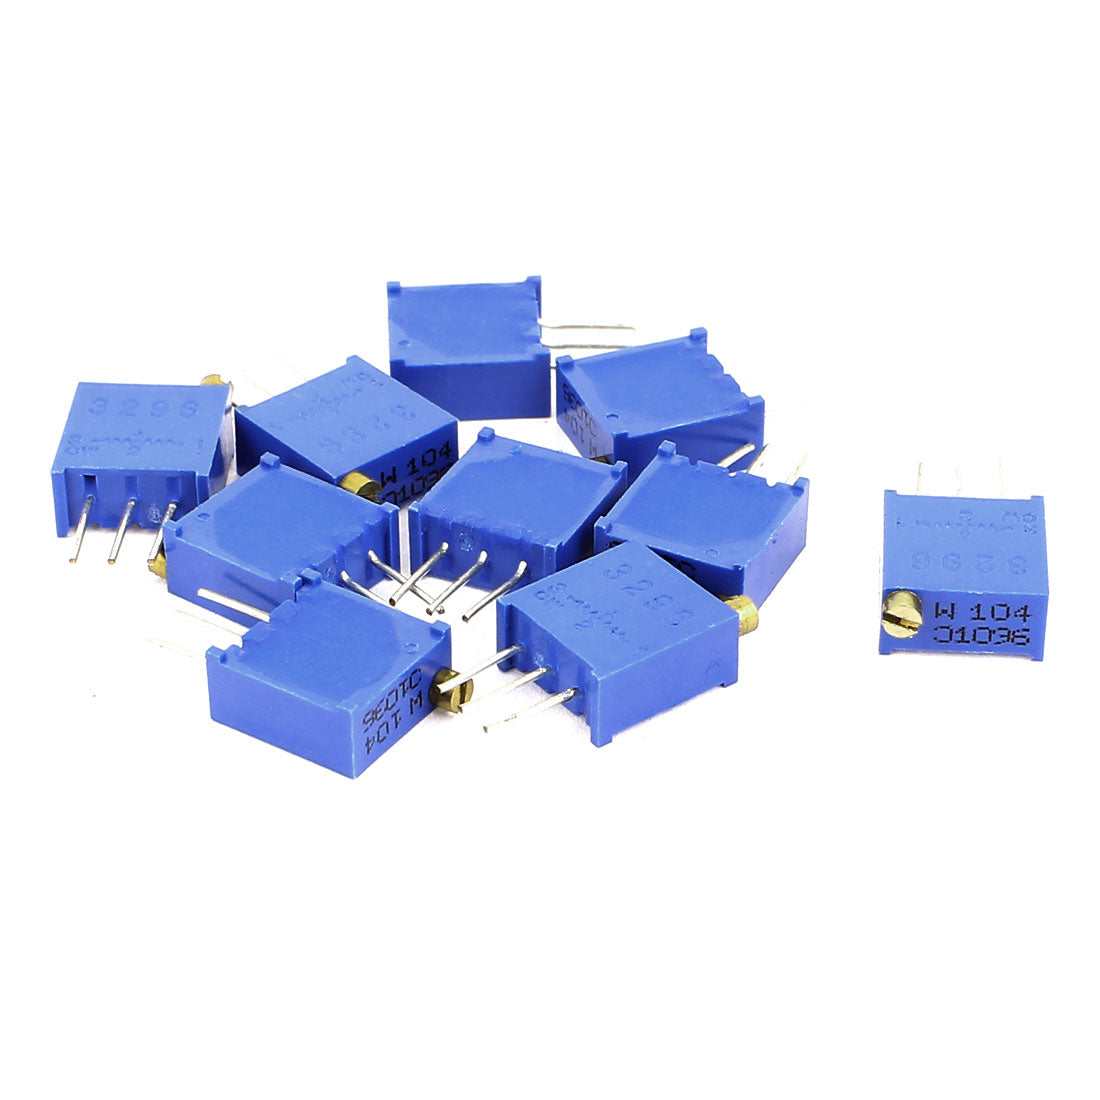 uxcell Uxcell 10 Pcs Potentiometer Trimmer Variable Resistor Resistive 3296 W104 100K Ohm